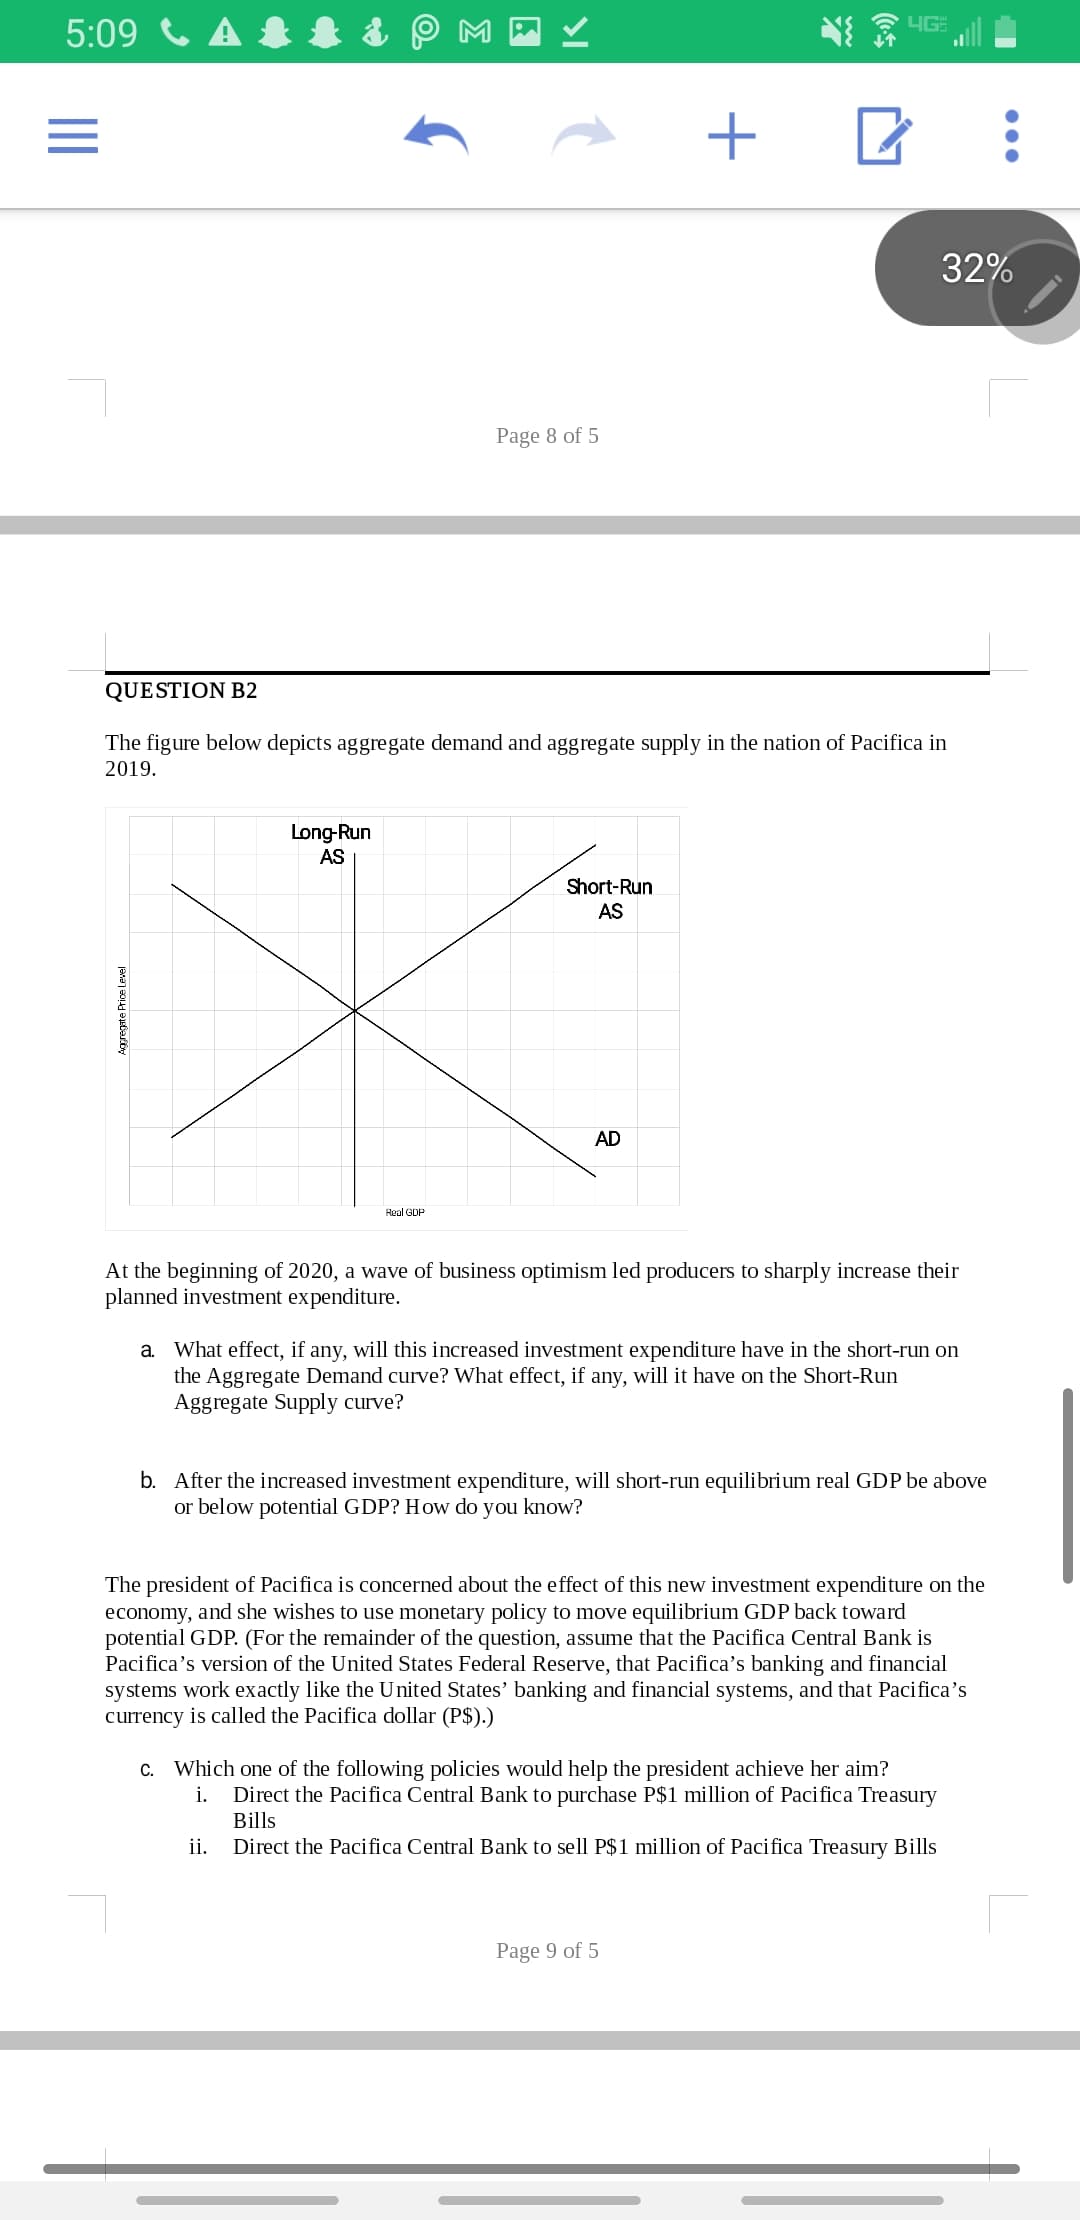 5:09 C A & 1 & P M -
32%
Page 8 of 5
QUESTION B2
The figure below depicts aggregate demand and aggregate supply in the nation of Pacifica in
2019.
Long-Run
AS
Short-Run
AS
AD
Real GDP
At the beginning of 2020, a wave of business optimism led producers to sharply increase their
planned investment expenditure.
a. What effect, if any, will this increased investment expenditure have in the short-run on
the Aggregate Demand curve? What effect, if any, will it have on the Short-Run
Aggregate Supply curve?
b. After the increased investment expenditure, will short-run equilibrium real GDP be above
or below potential GDP? How do you know?
The president of Pacifica is concerned about the effect of this new investment expenditure on the
economy, and she wishes to use monetary policy to move equilibrium GDP back toward
potential GDP. (For the remainder of the question, assume that the Pacifica Central Bank is
Pacifica's version of the United States Federal Reserve, that Pacifica's banking and financial
systems work exactly like the United States' banking and financial systems, and that Pacifica's
currency is called the Pacifica dollar (P$).)
c. Which one of the following policies would help the president achieve her aim?
Direct the Pacifica Central Bank to purchase P$1 million of Pacifica Treasury
Bills
i.
ii.
Direct the Pacifica Central Bank to sell P$1 million of Pacifica Treasury Bills
Page 9 of 5
